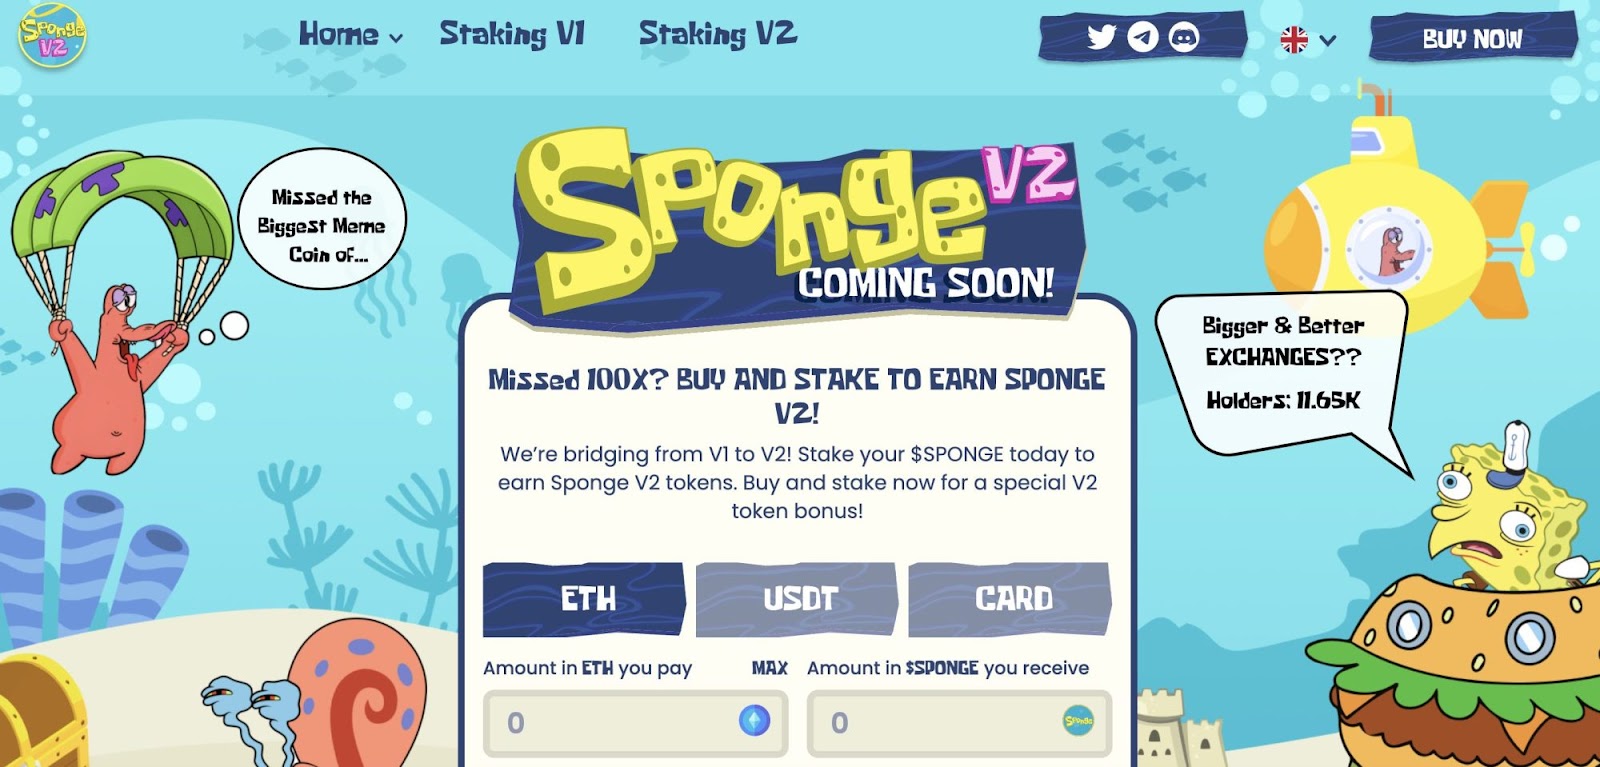 A screenshot from the homepage of the Sponge V2 website